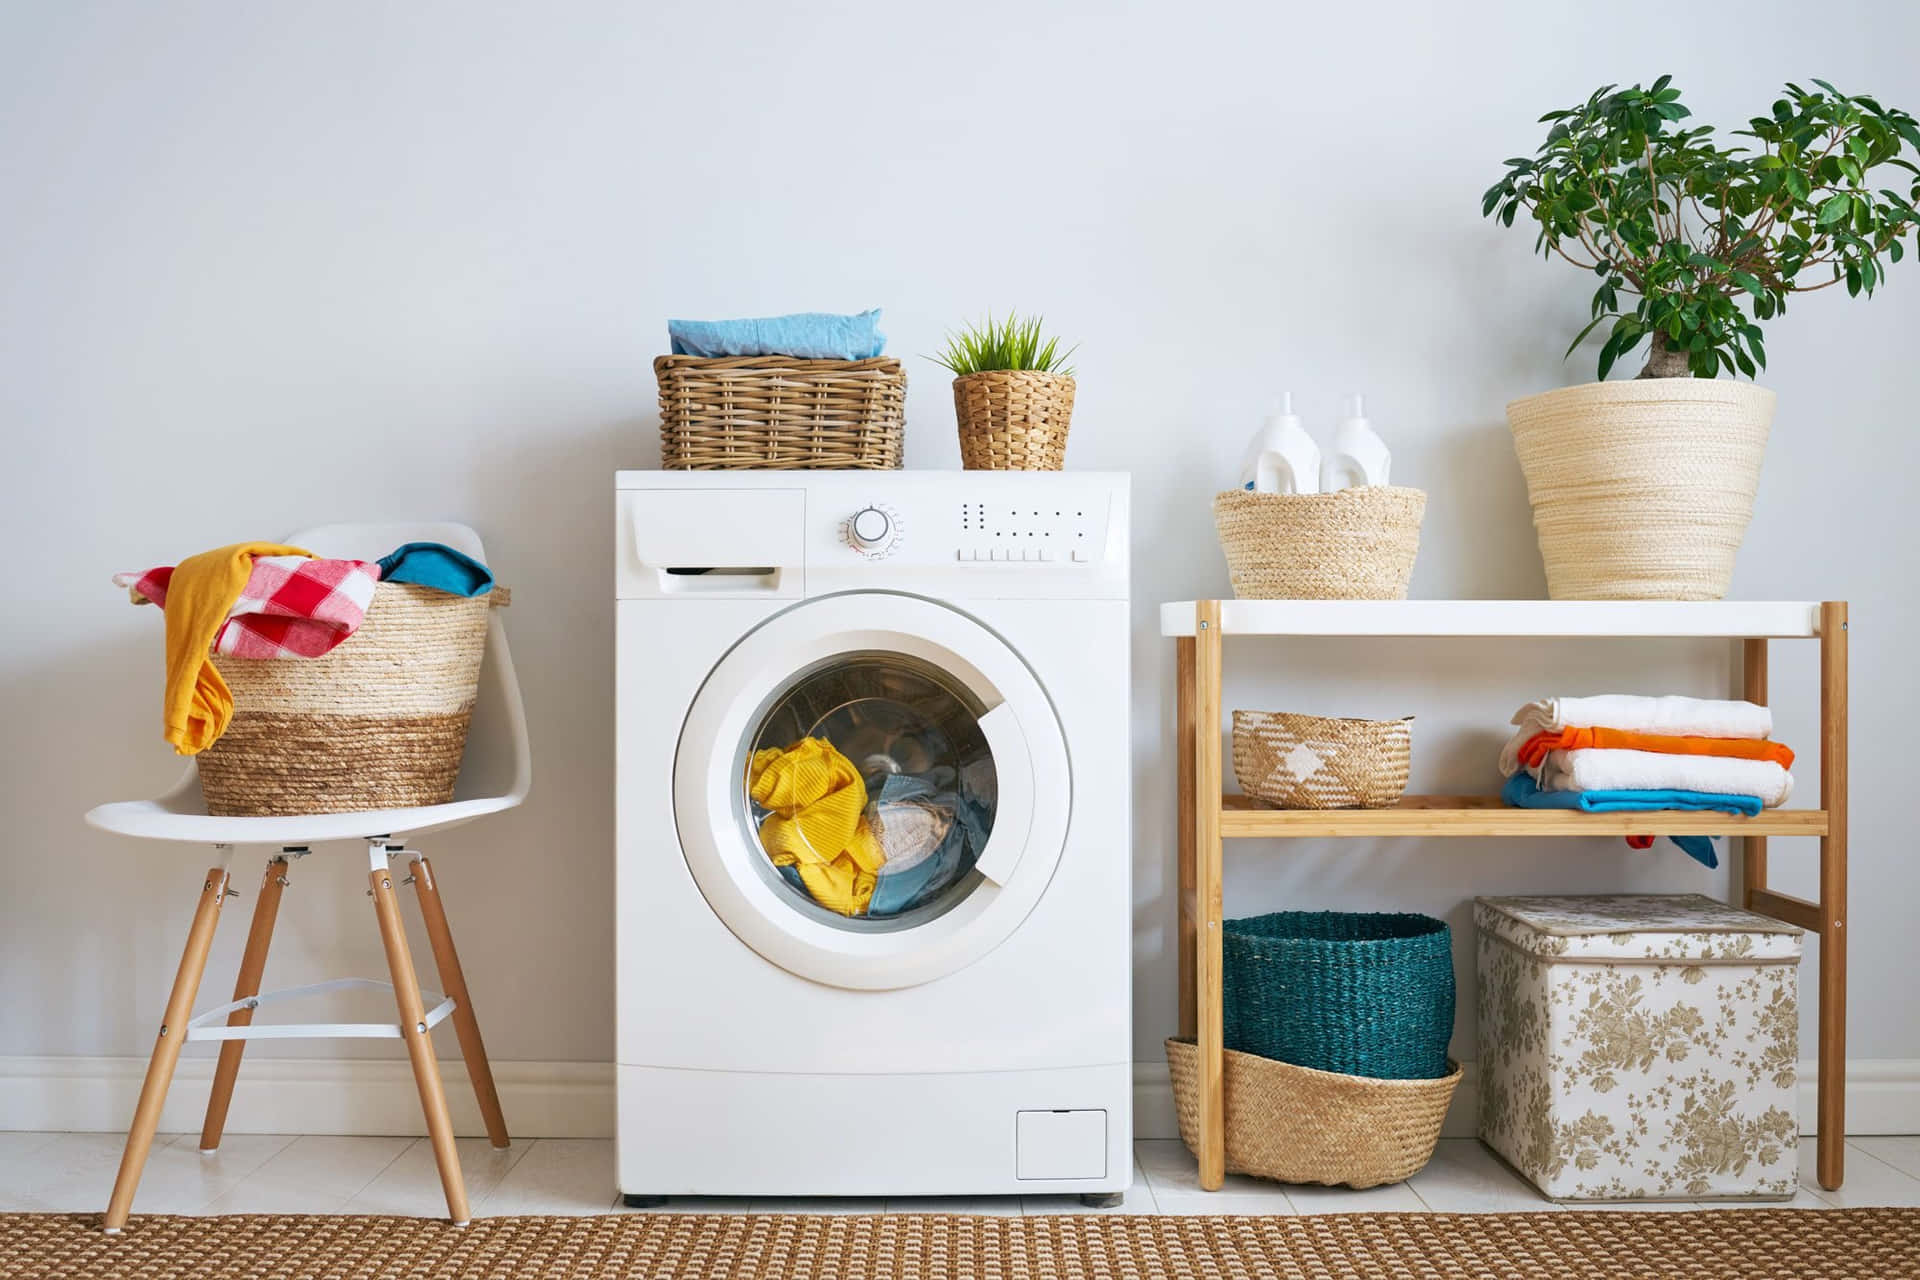 A White Washing Machine And Baskets In A Room